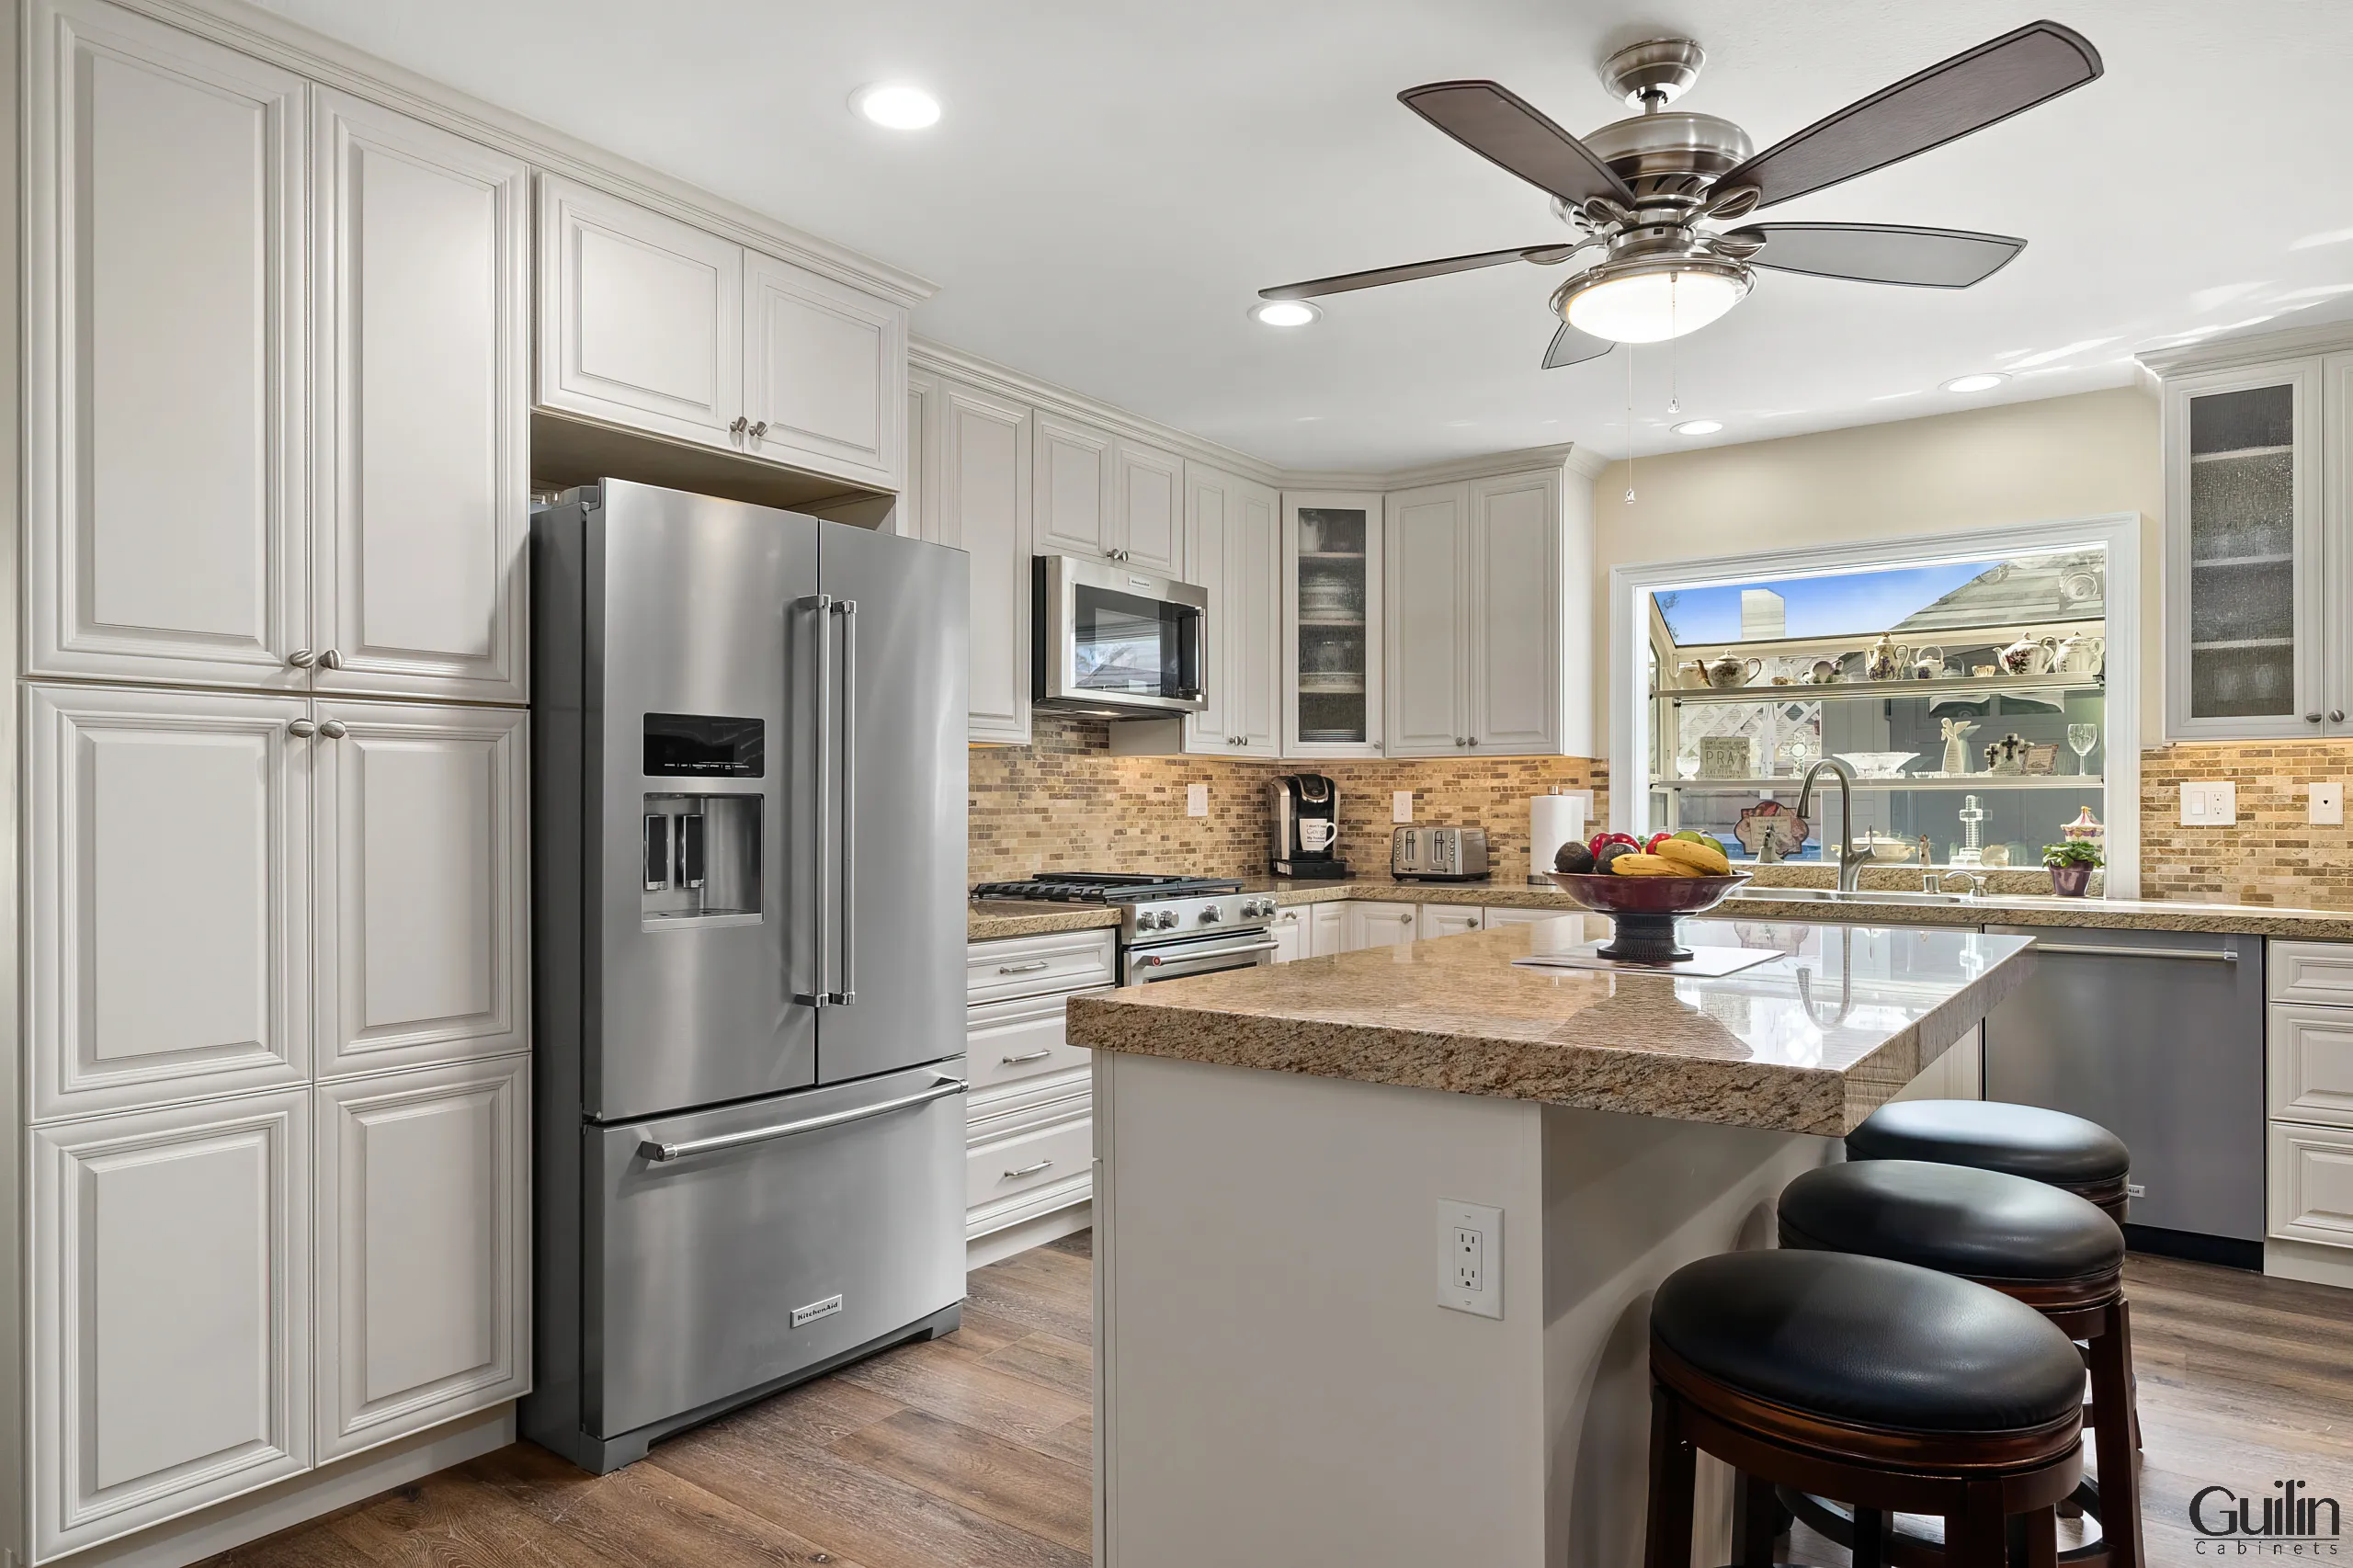 The pros of granite countertops include their durability, heat resistance, and low maintenance.